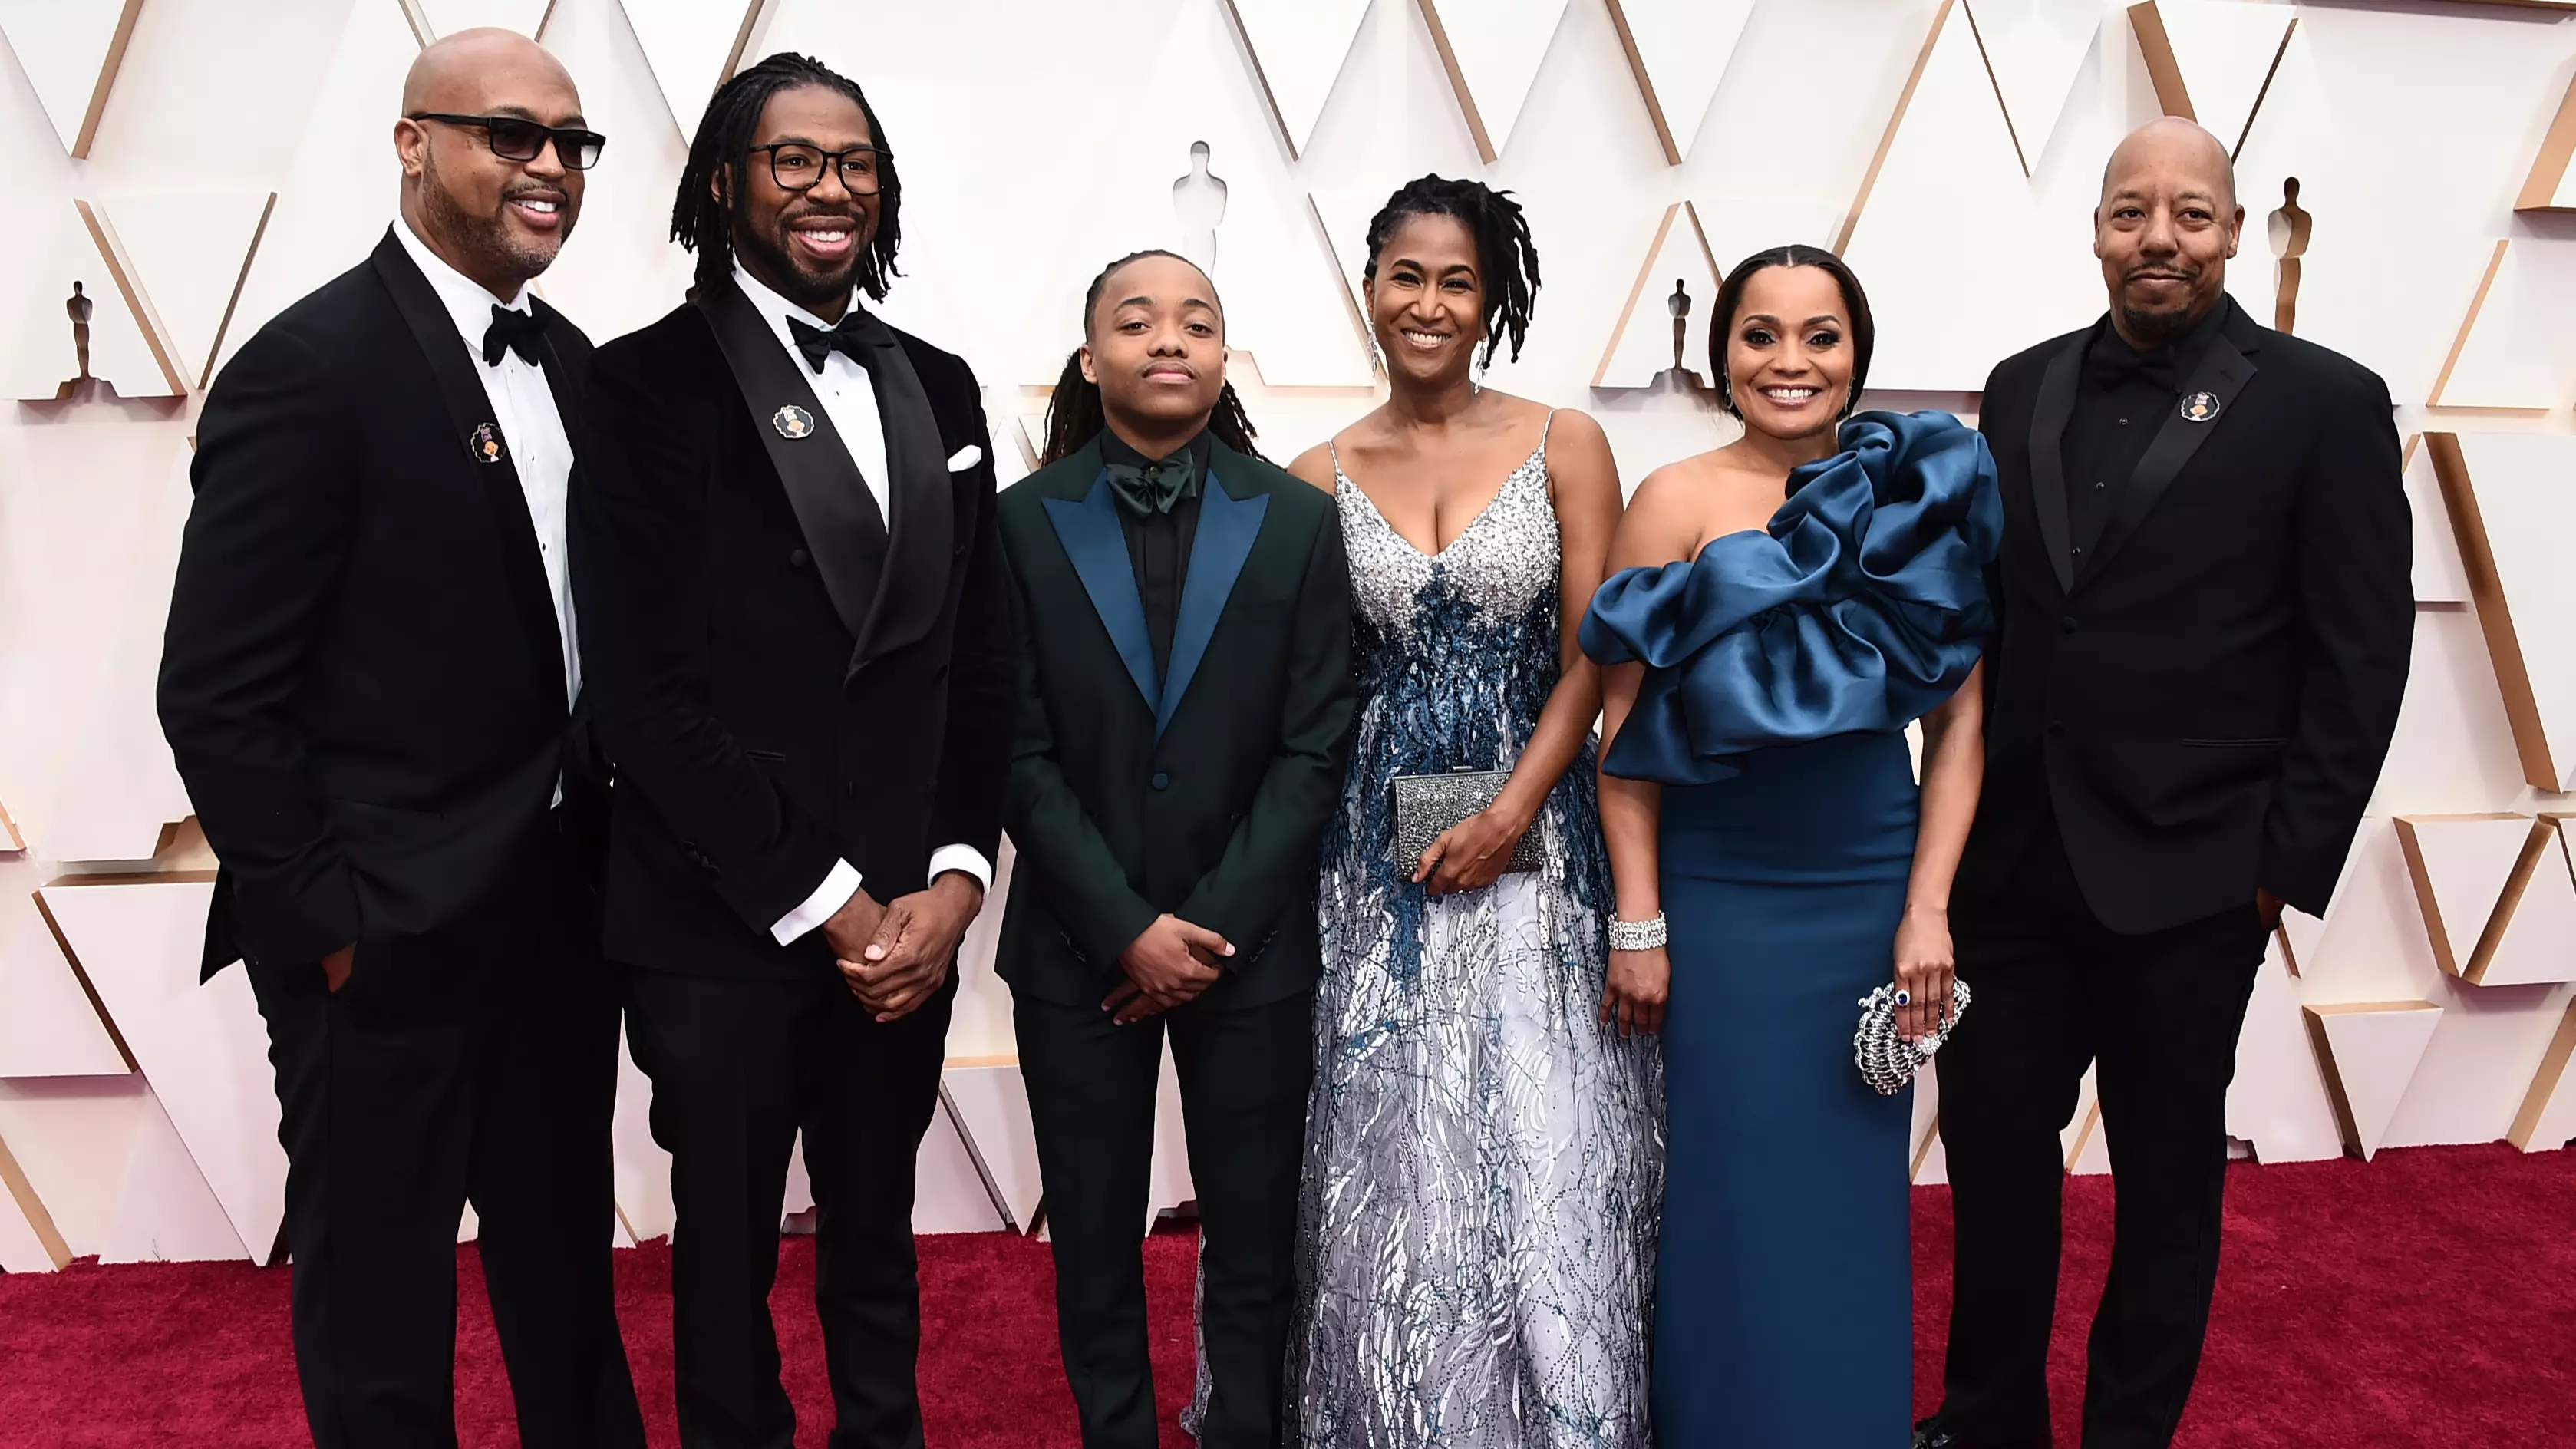 Student Who Was Told To Cut Dreads Walks Red Carpet As Oscars Guest